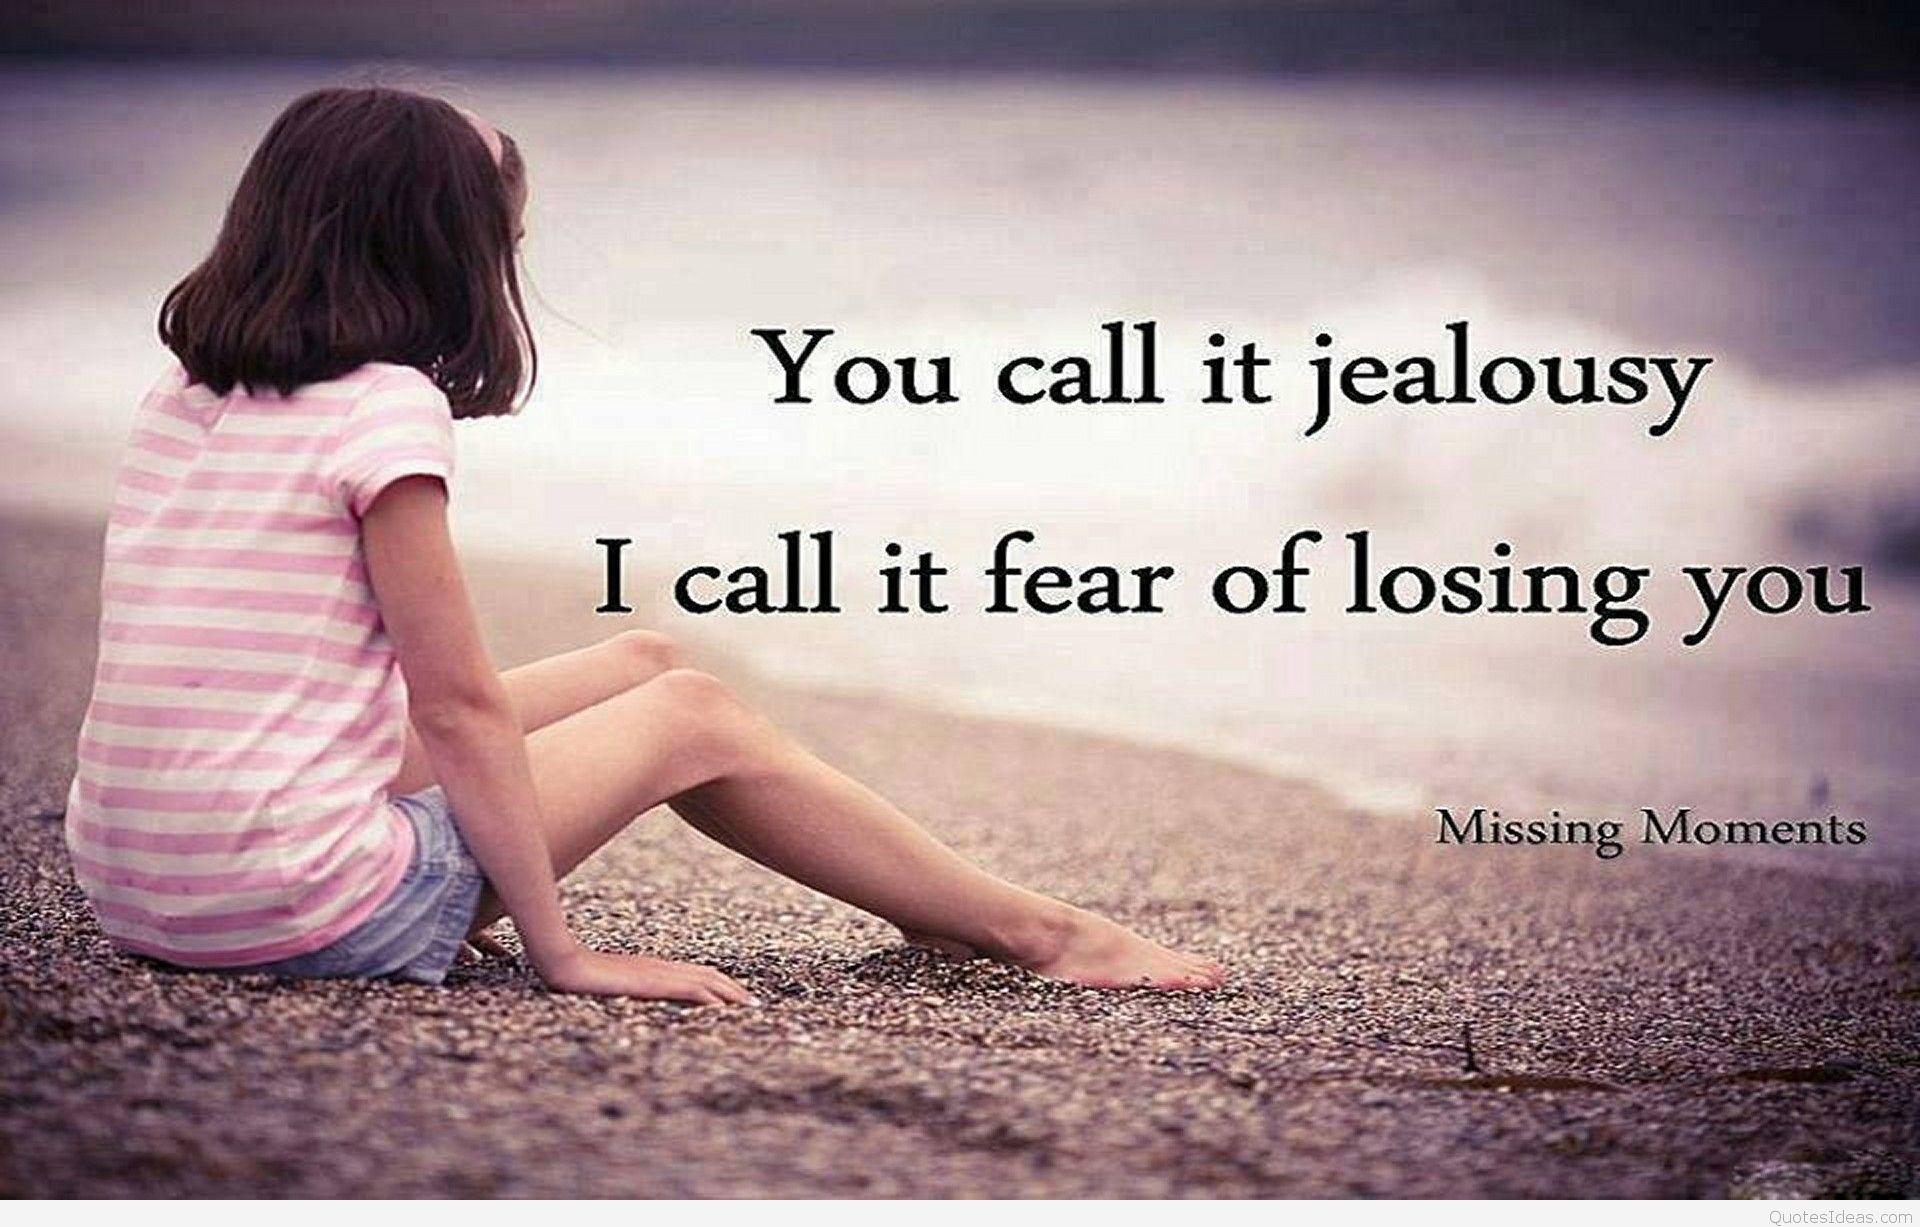 Sad Wallpapers Quotes For Girl Very Sad Quotes Image, Pics